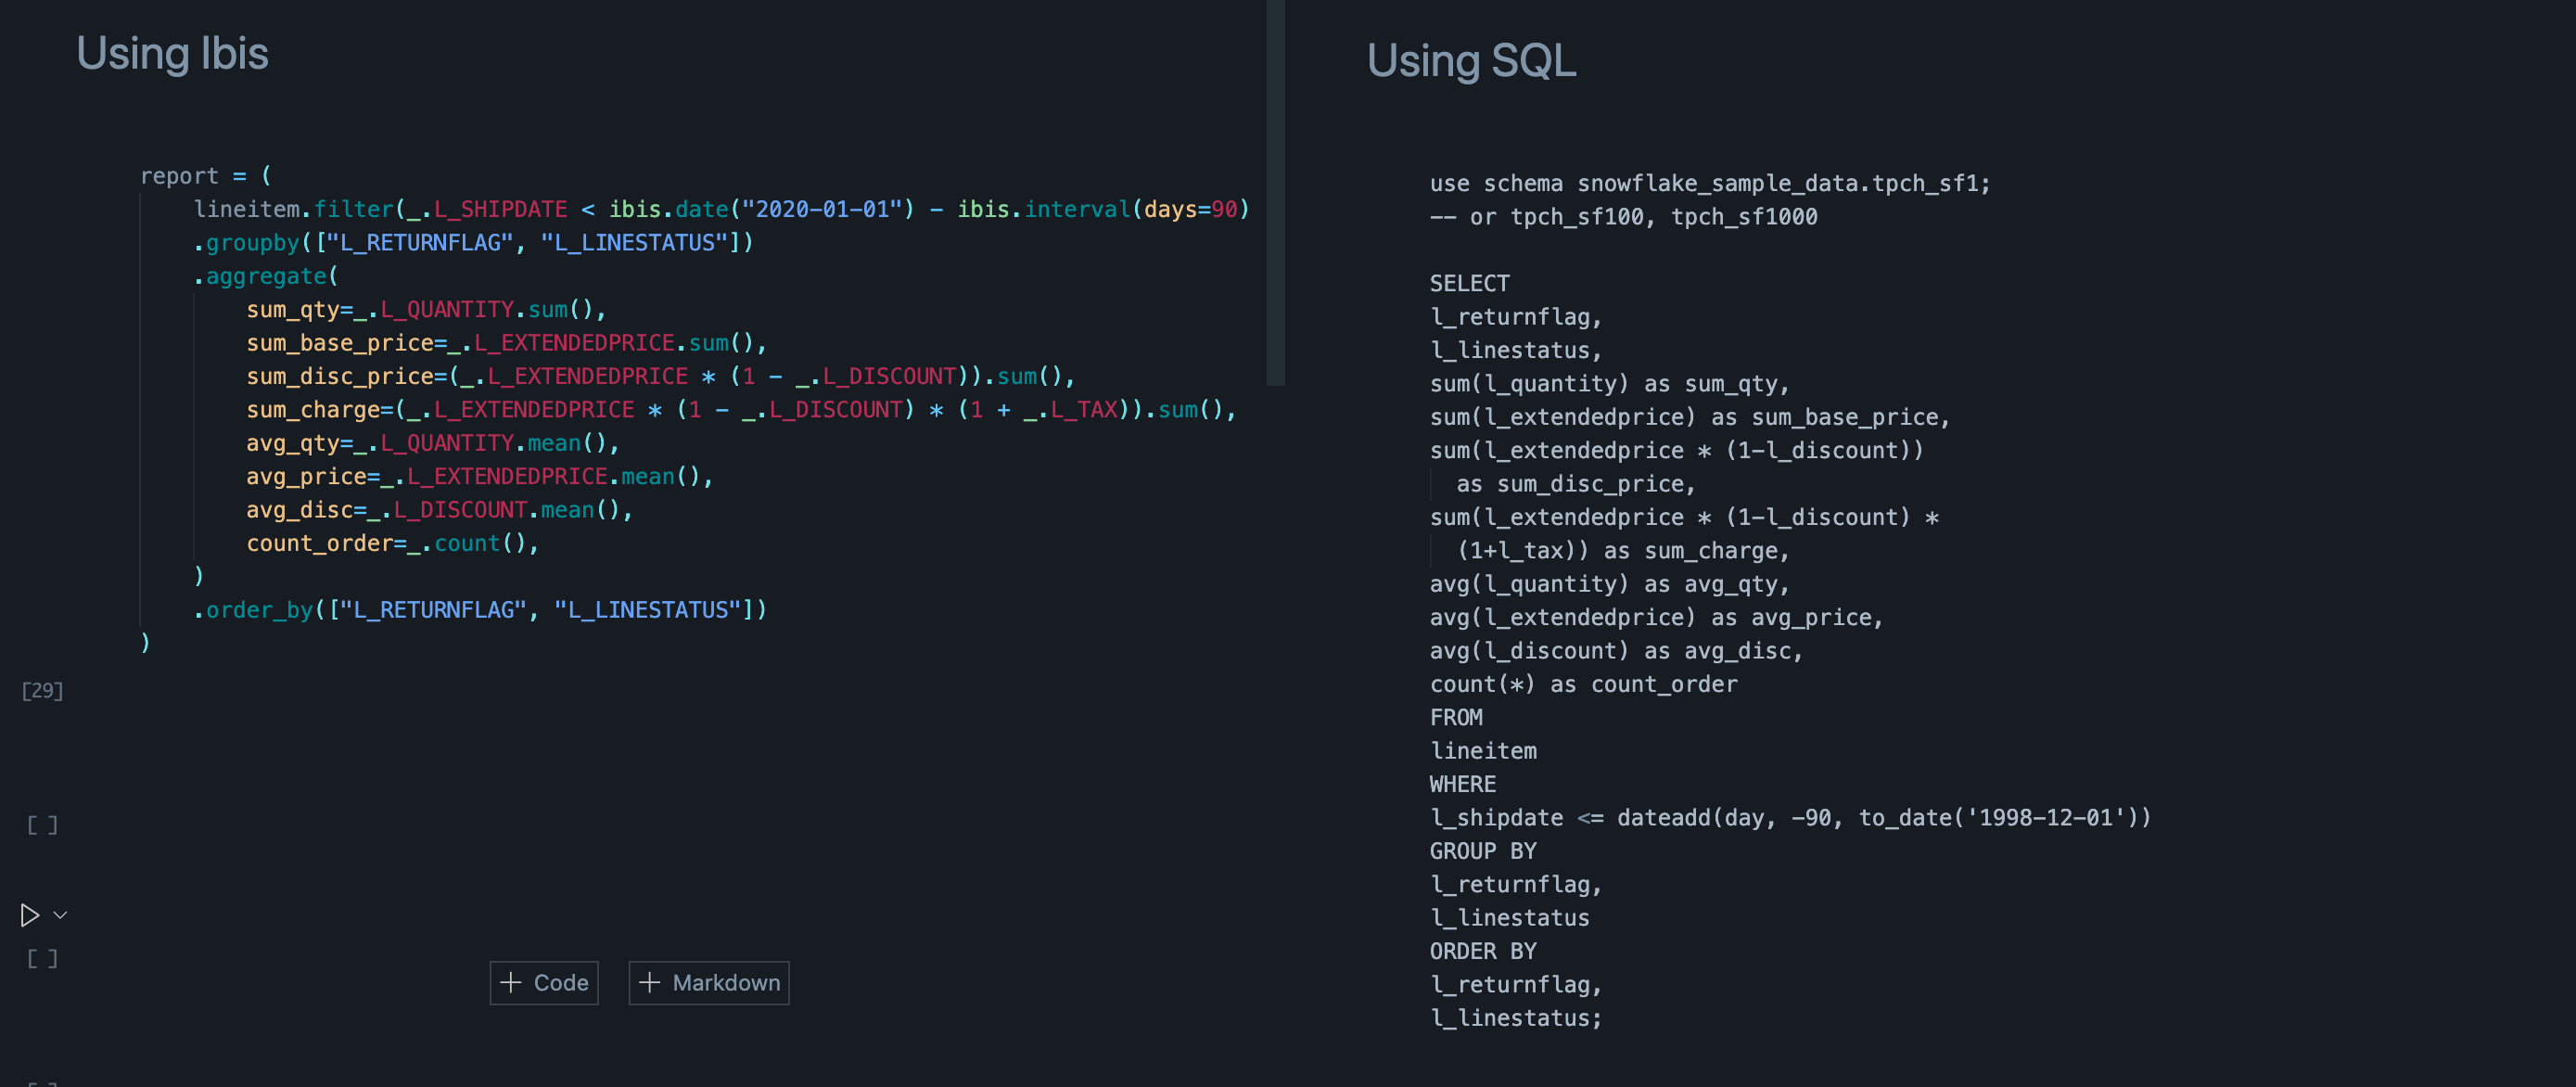 Ibis and SQL code side by side comparasion